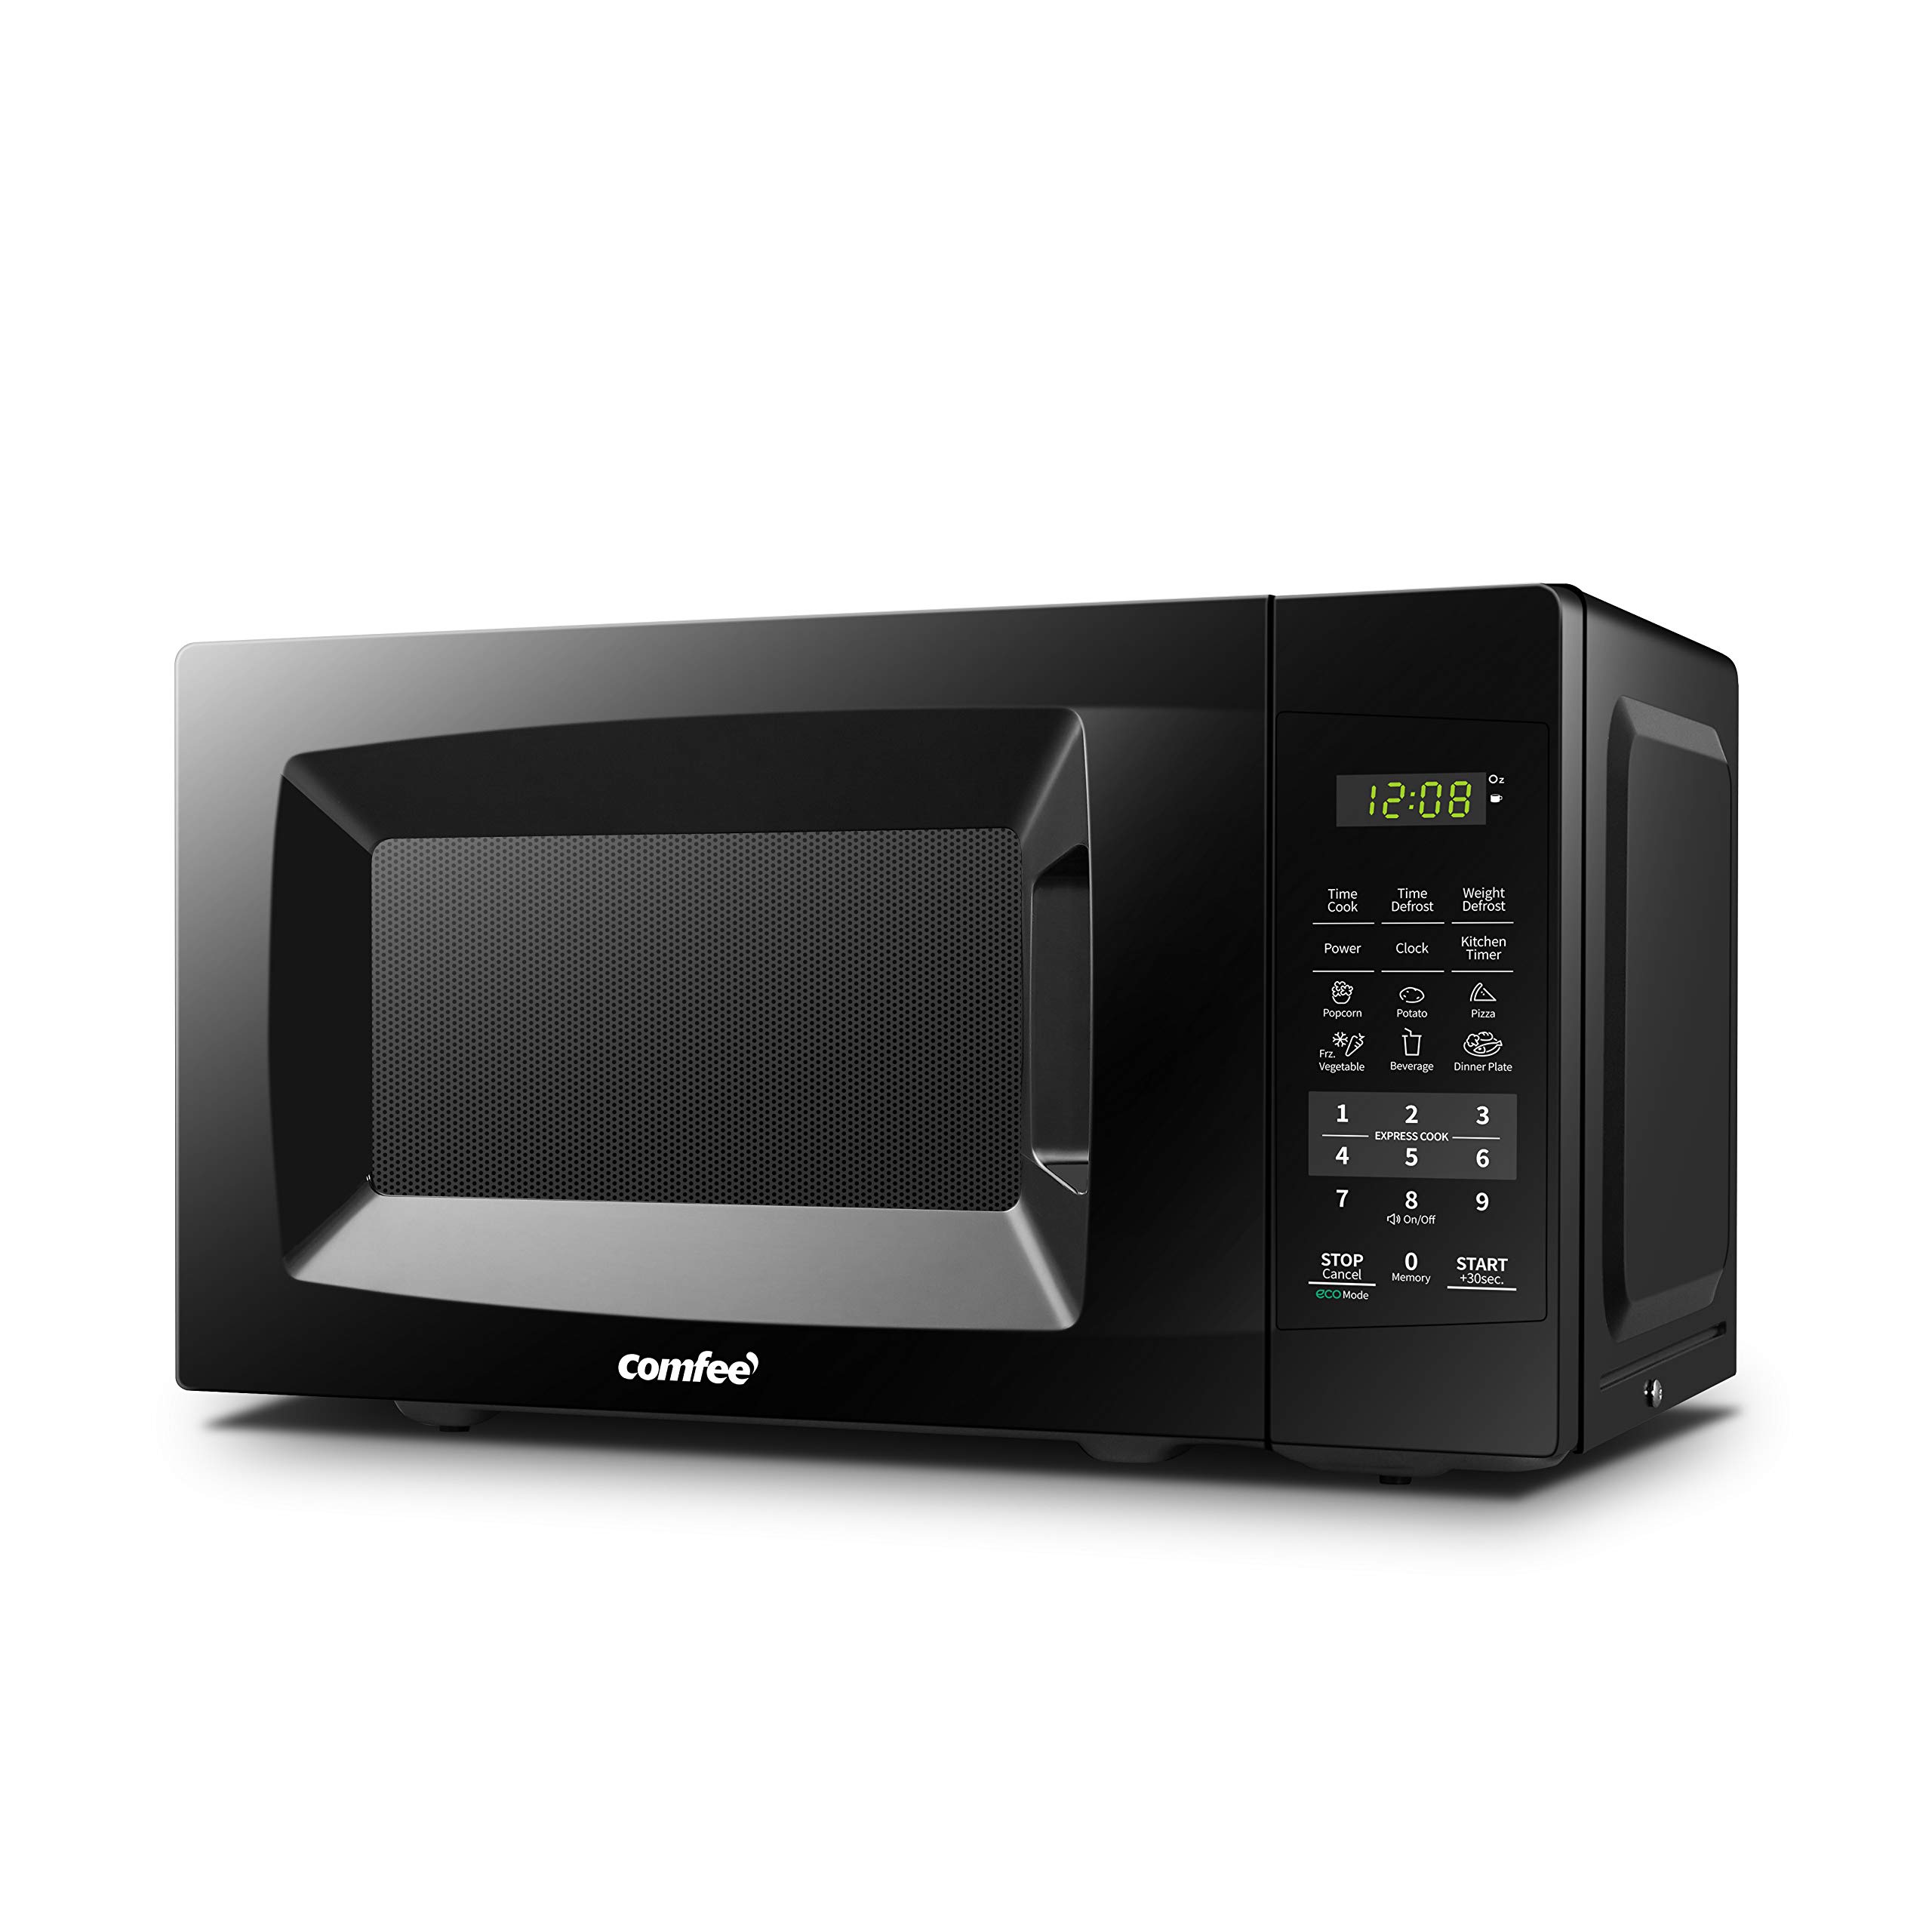 Midea WHS-87LB1 Refrigerator, 2.4 Cubic Feet, Black & COMFEE' EM720CPL-PMB Countertop Microwave Oven with Sound On/Off, ECO Mode and Easy One-Touch Buttons, 0.7cu.ft, 700W, Black